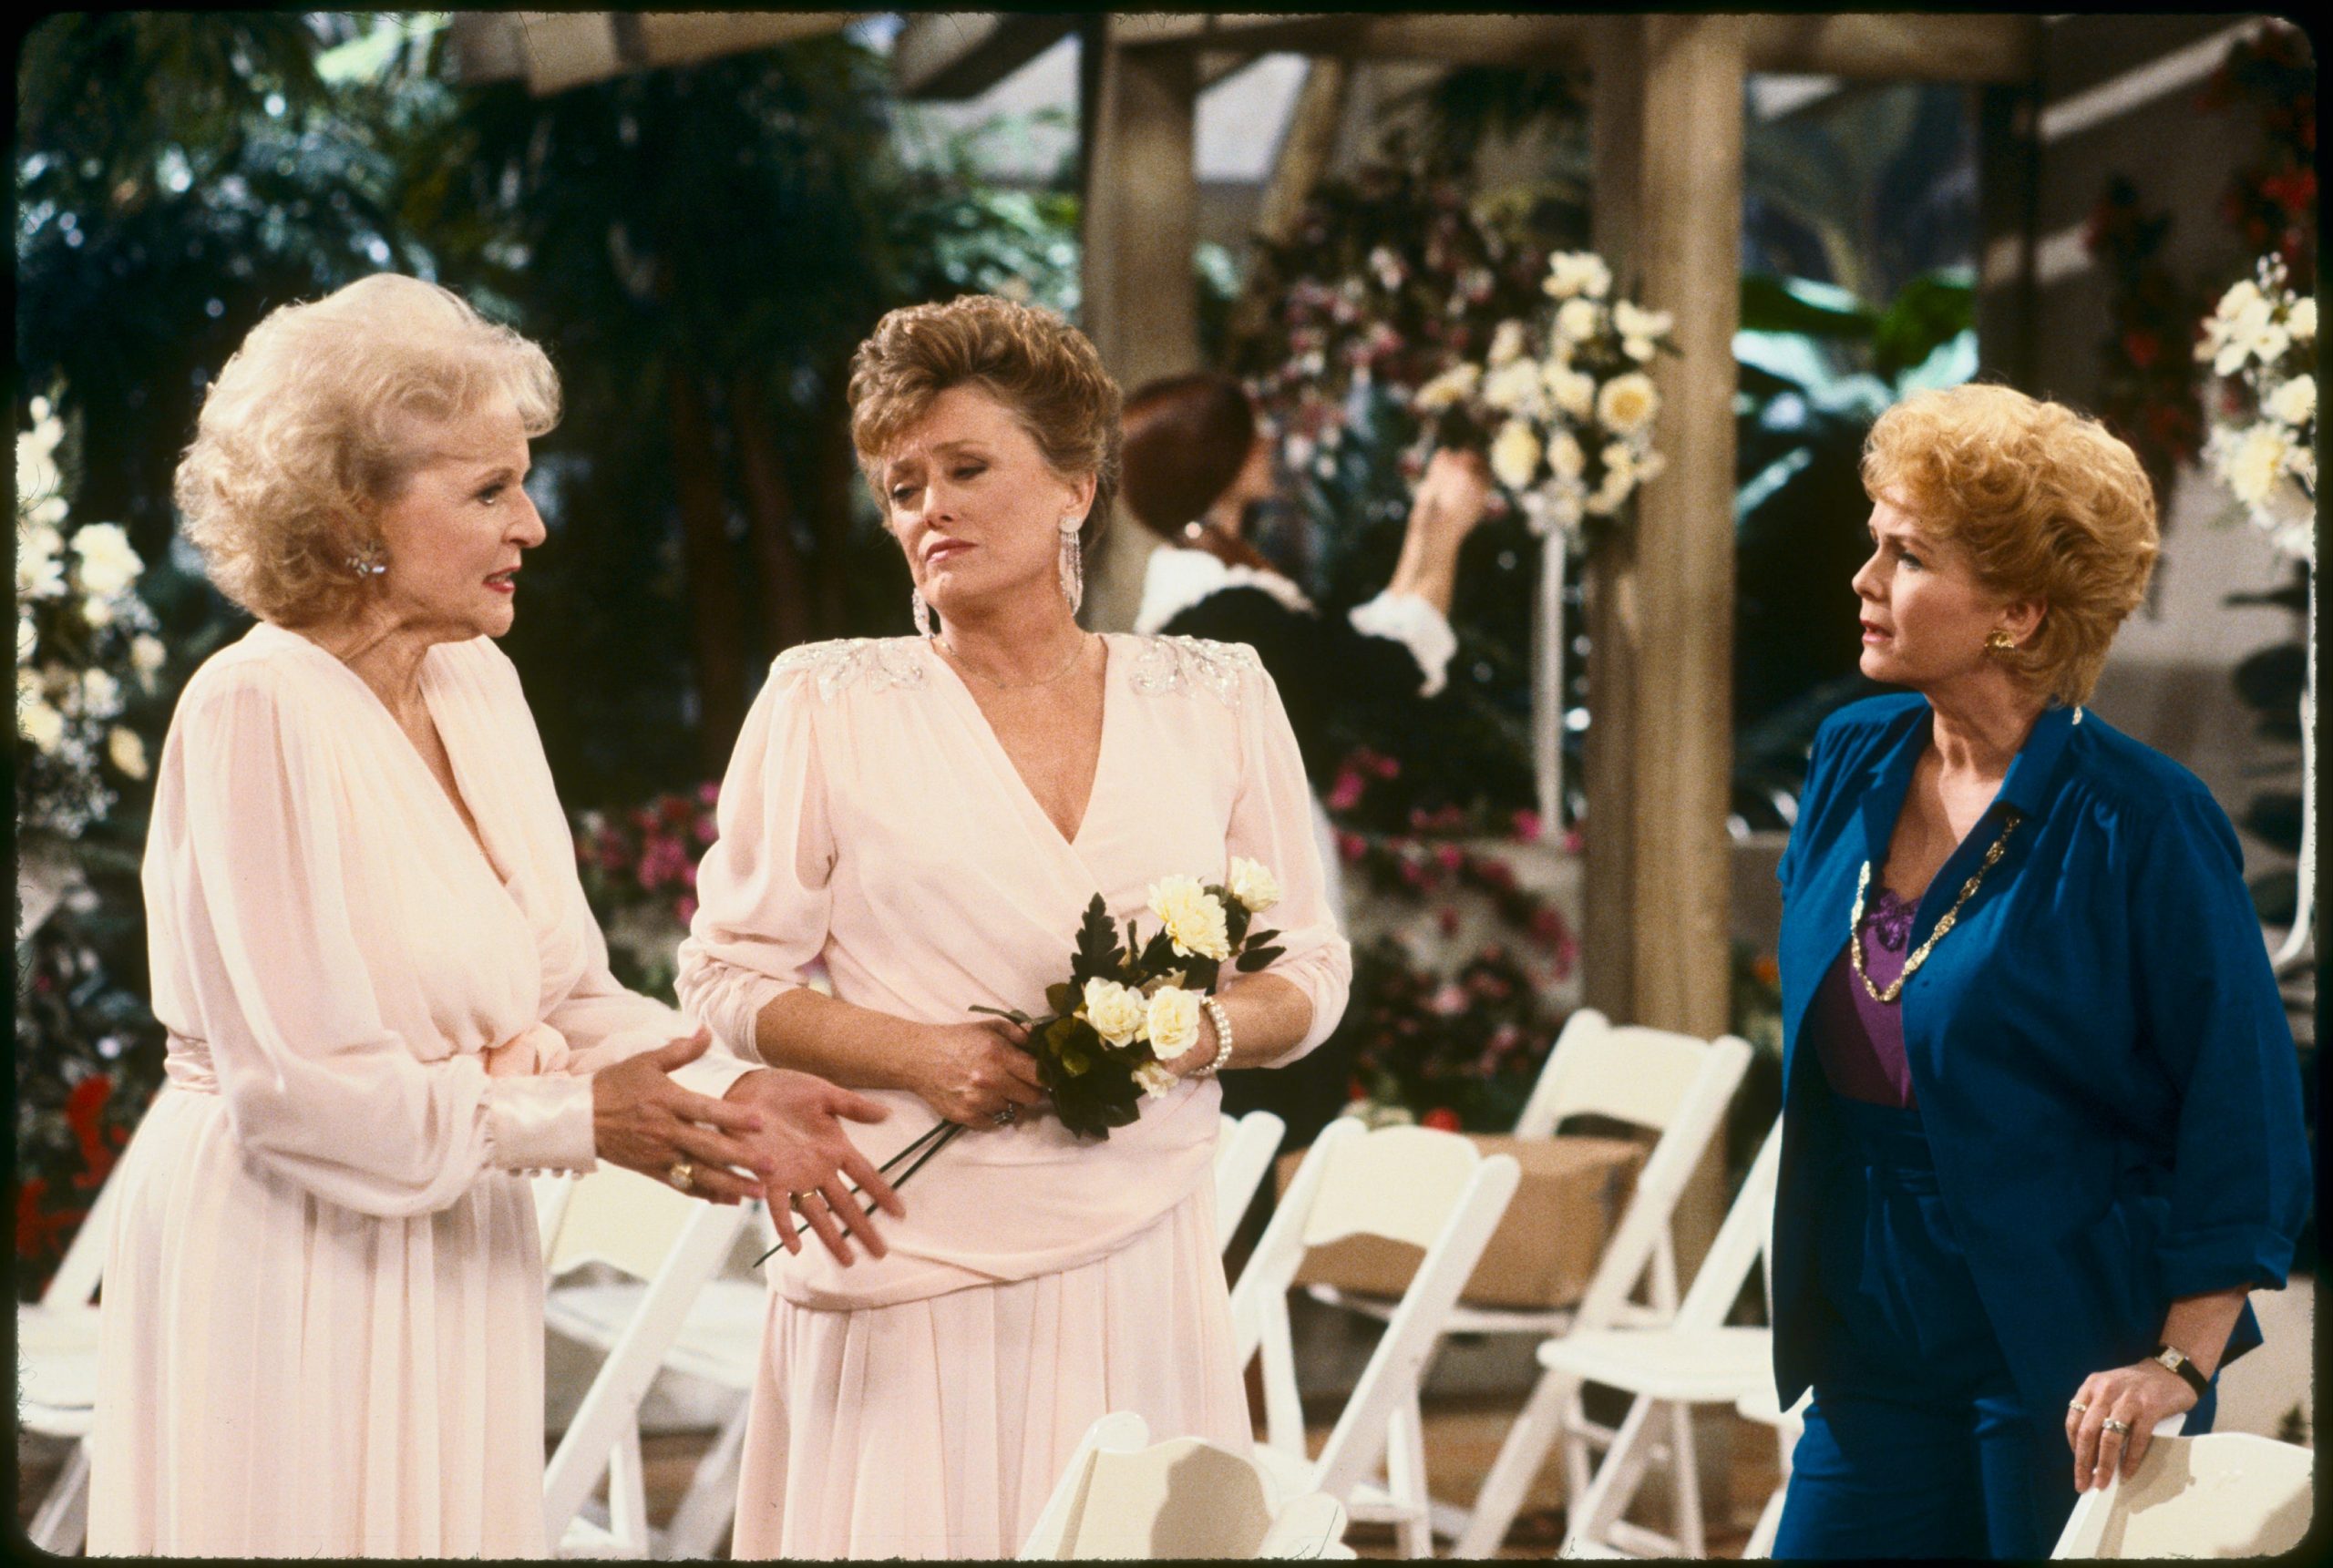 Betty White alongside Rue McClanahan and Debbie Reynolds on "The Golden Girls."